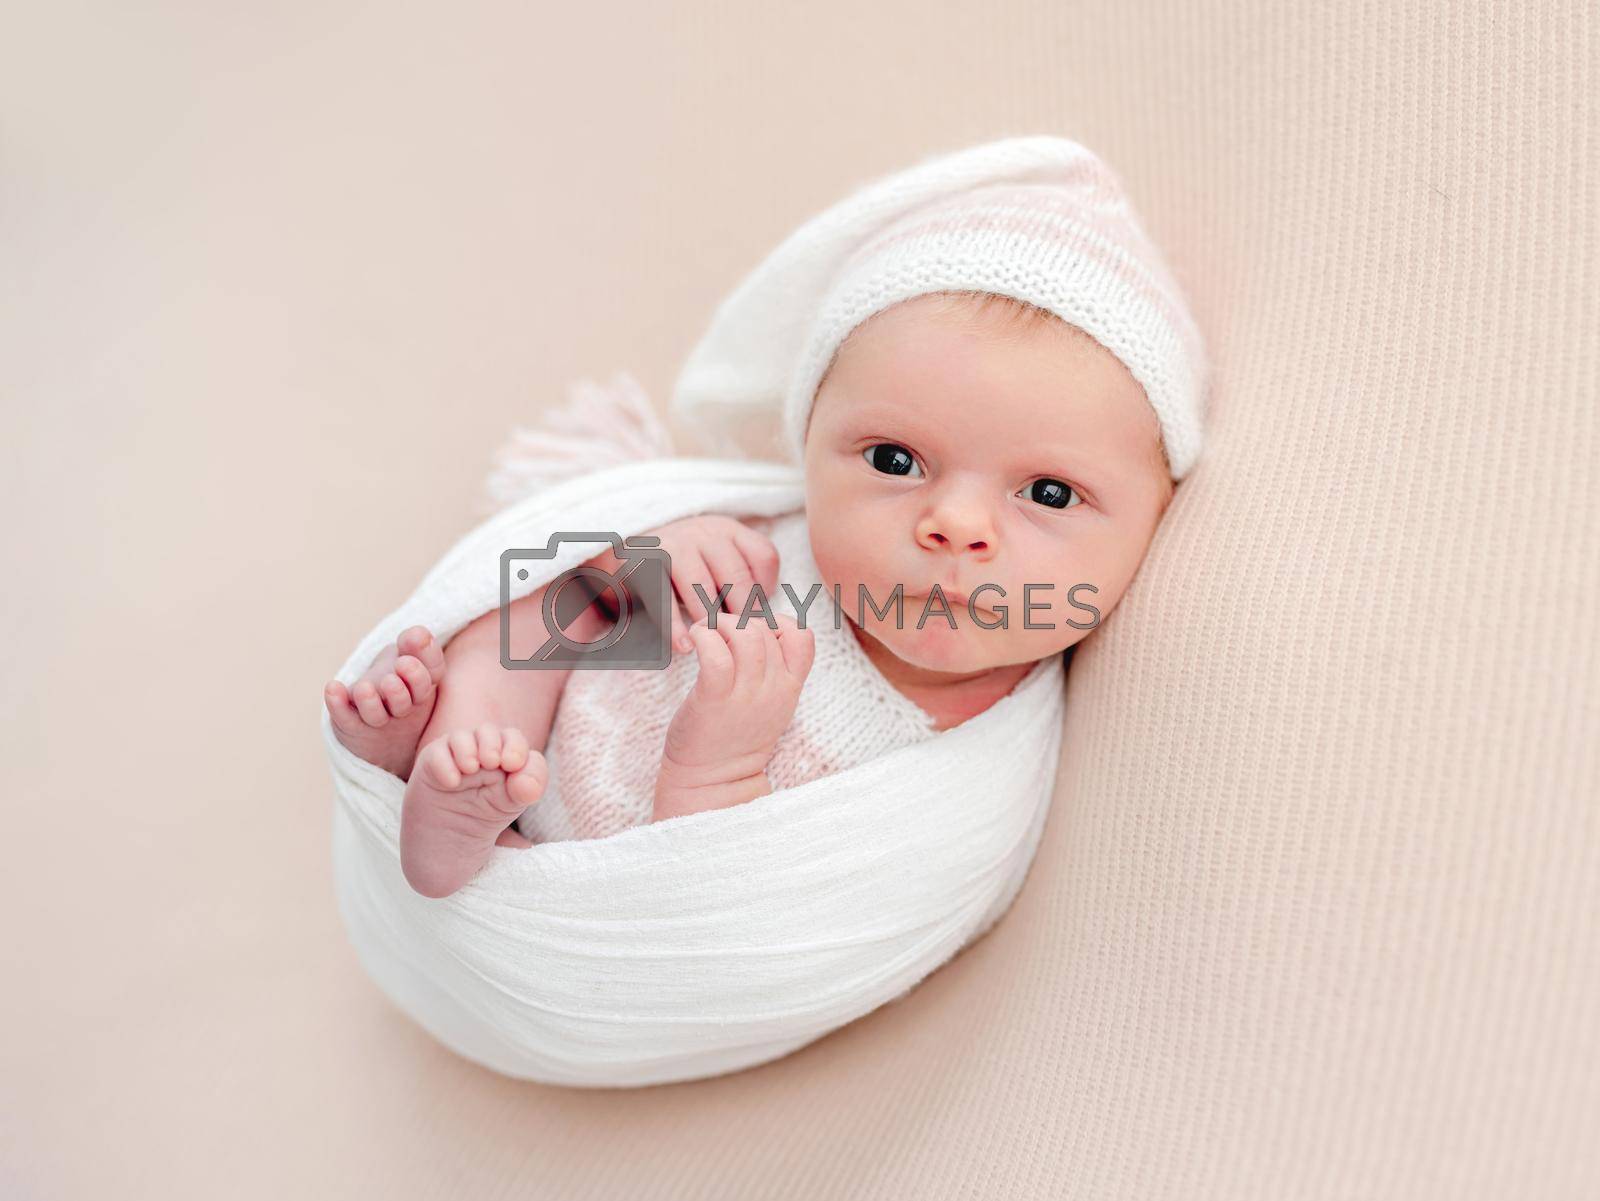 Royalty free image of Sleepless newborn in white suit and hat by tan4ikk1